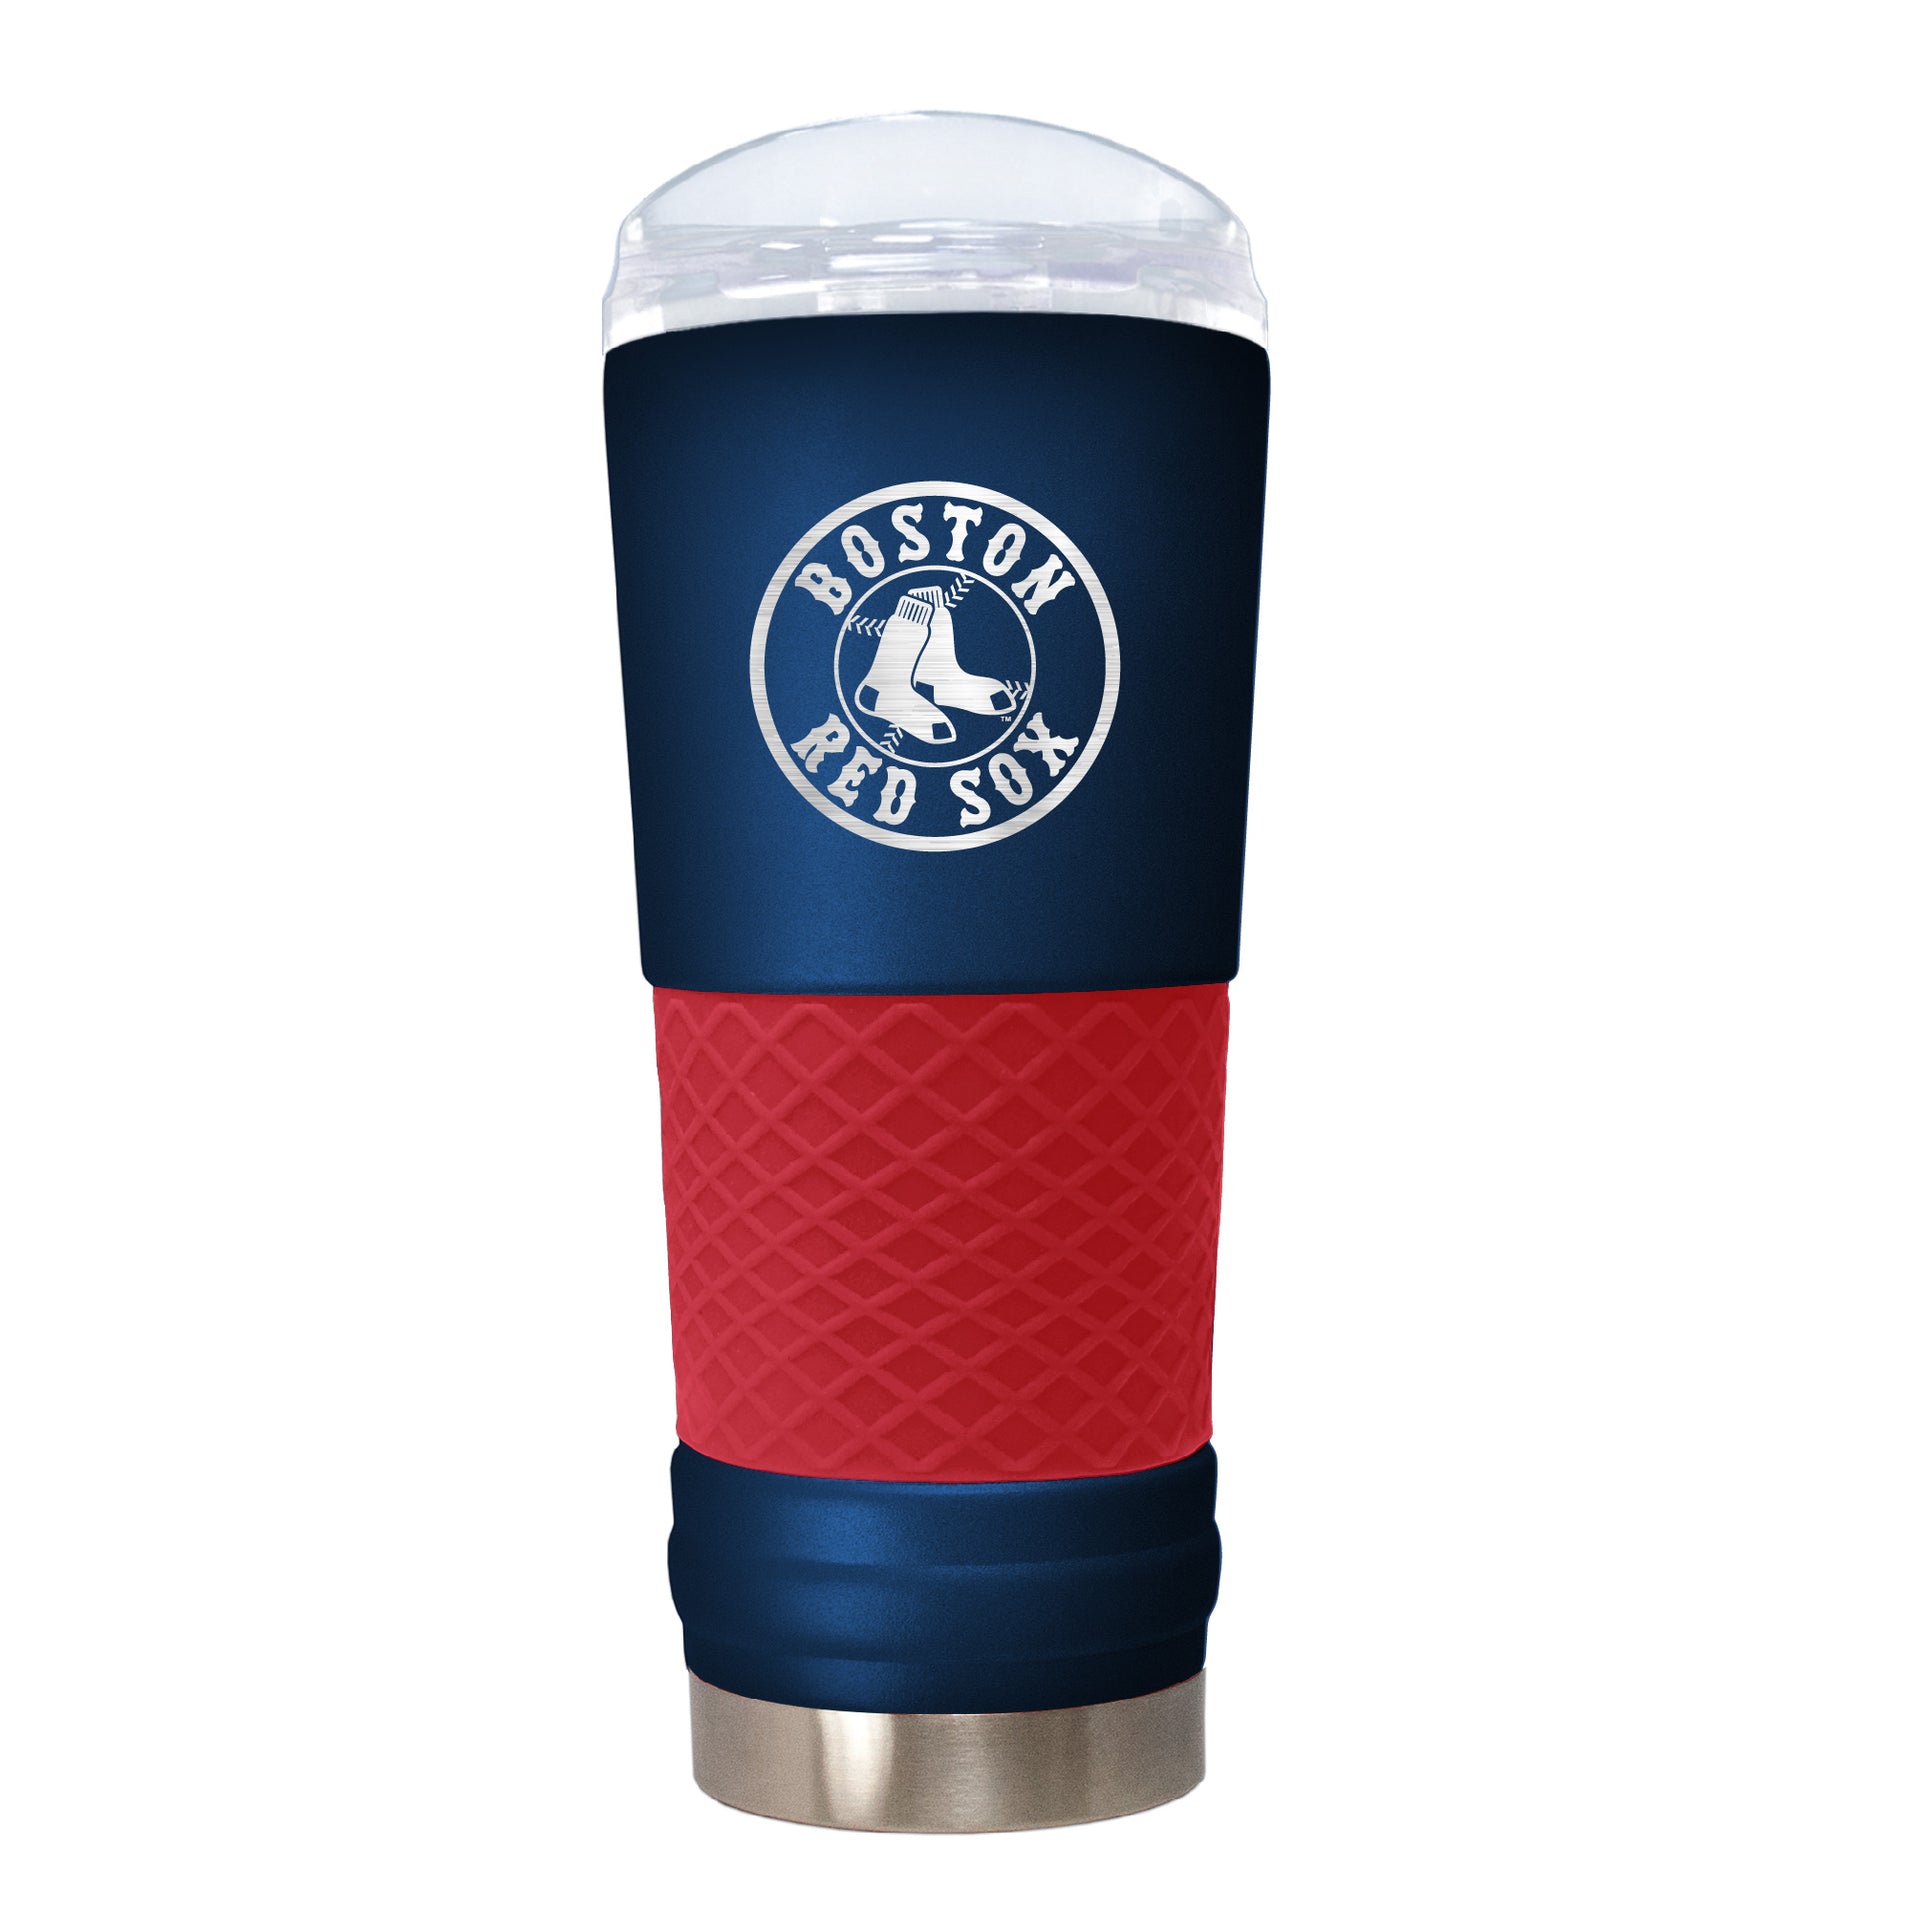 Boston Red Sox "The Draft" 24 oz. Stainless Steel Travel Tumbler - Dynasty Sports & Framing 